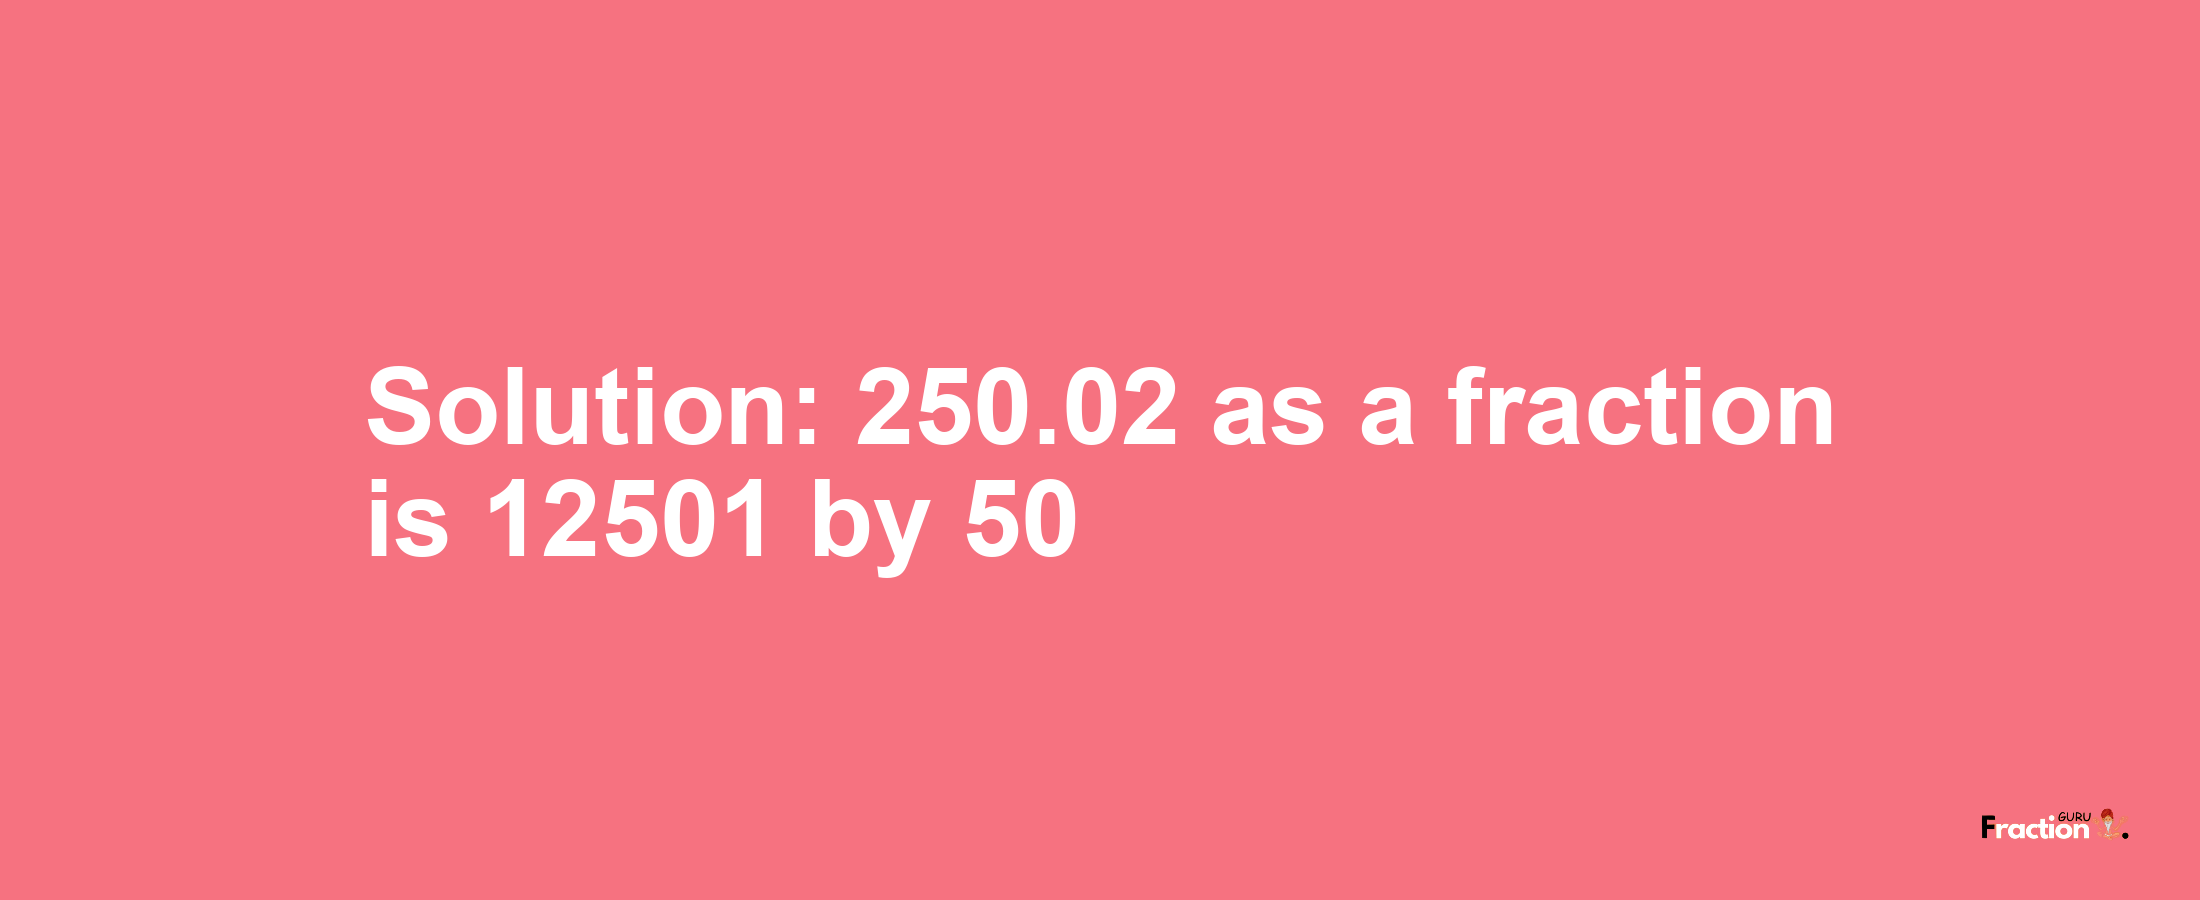 Solution:250.02 as a fraction is 12501/50